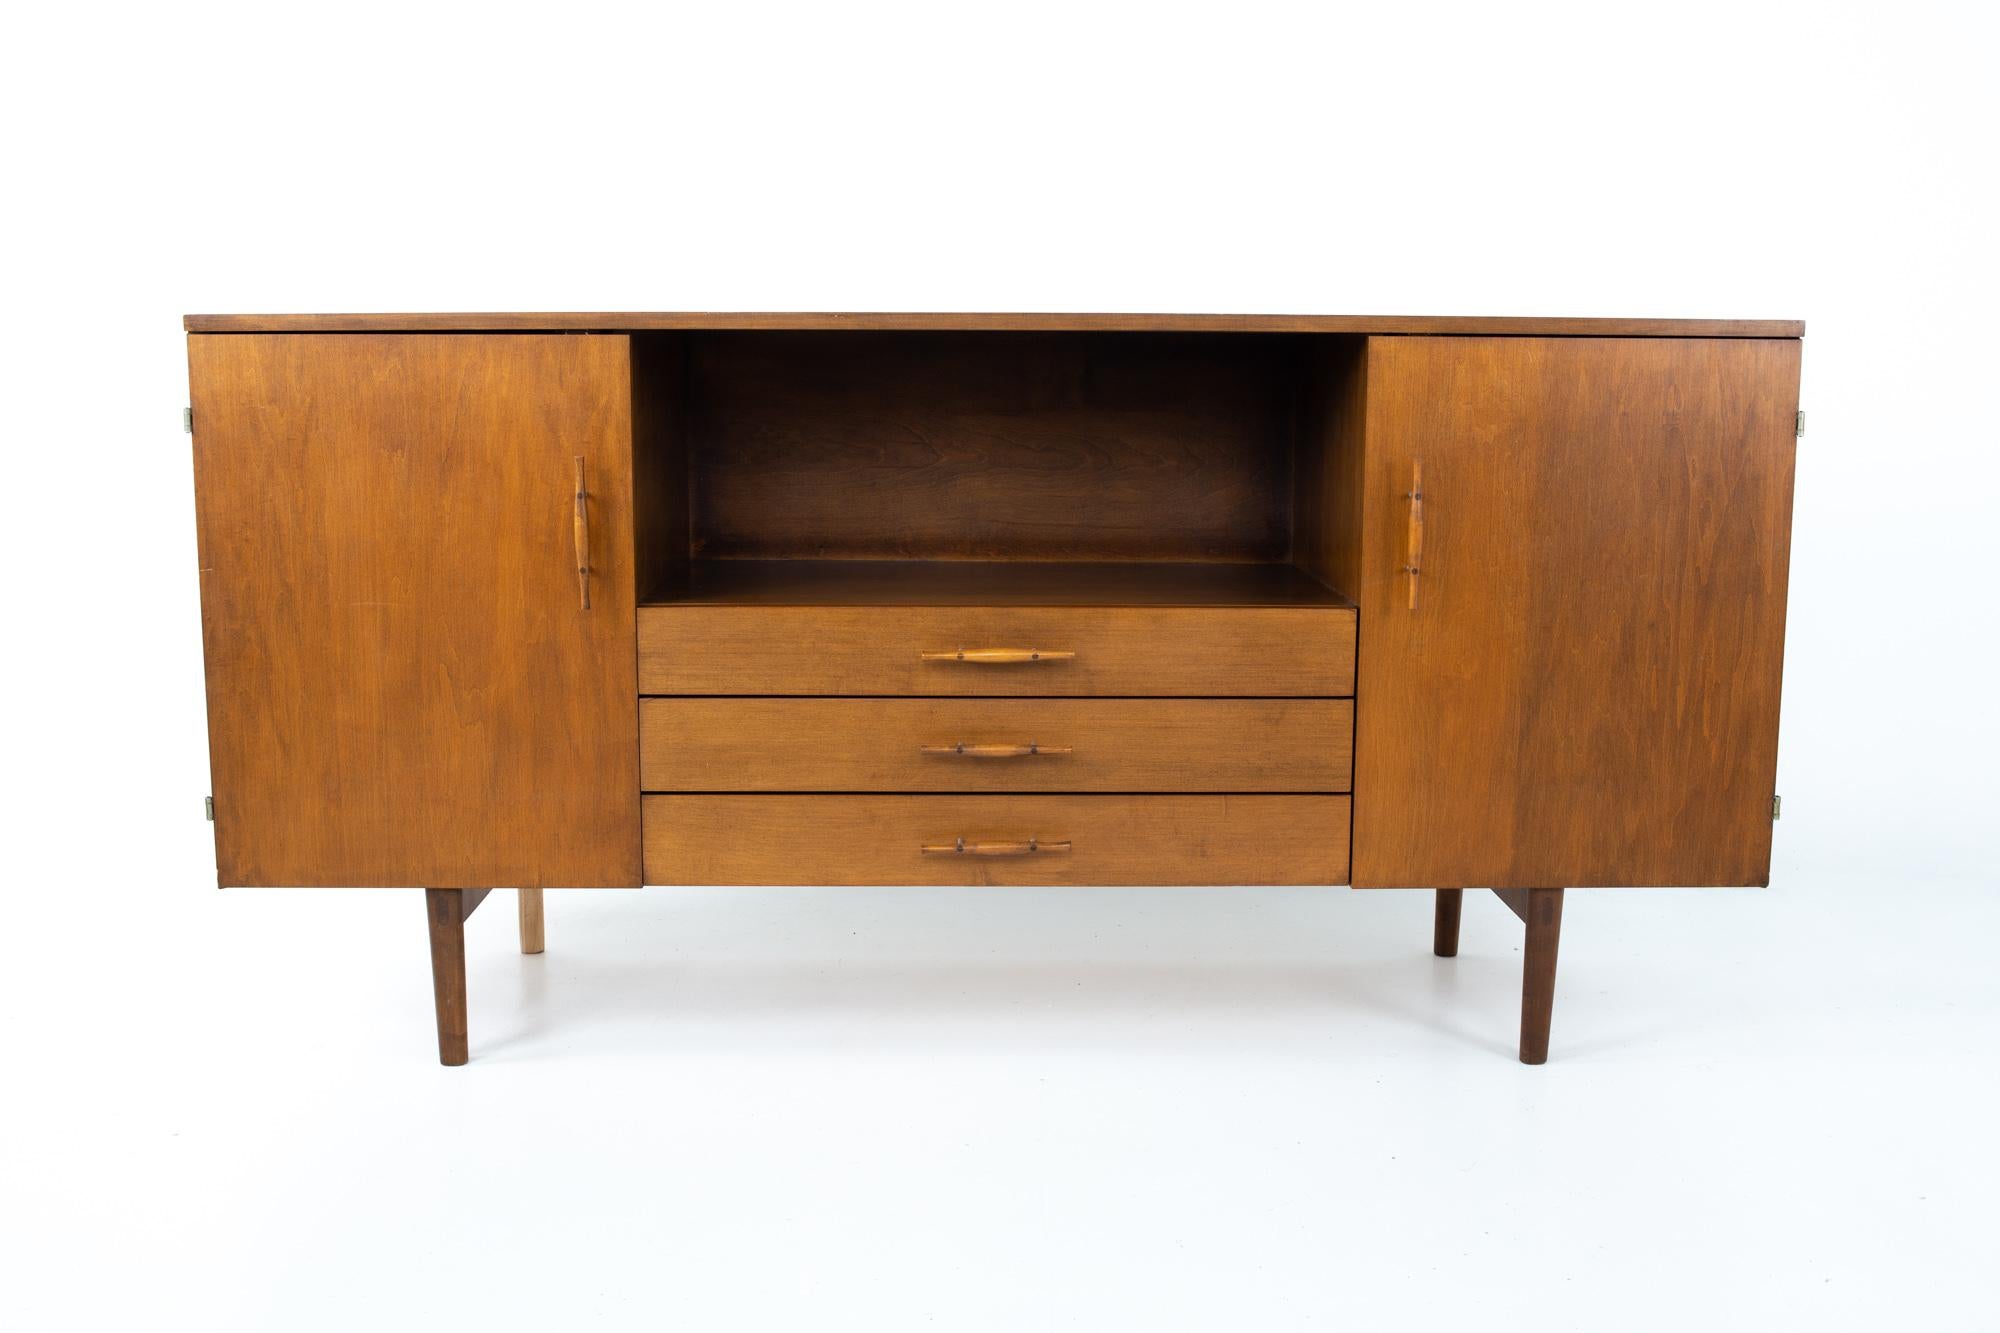 Paul McCobb Planner Group midcentury sideboard credenza
Credenza measures: 66 wide x 18 deep x 32 inches high

This price includes getting this piece in what we call restored vintage condition. That means the piece is permanently fixed upon